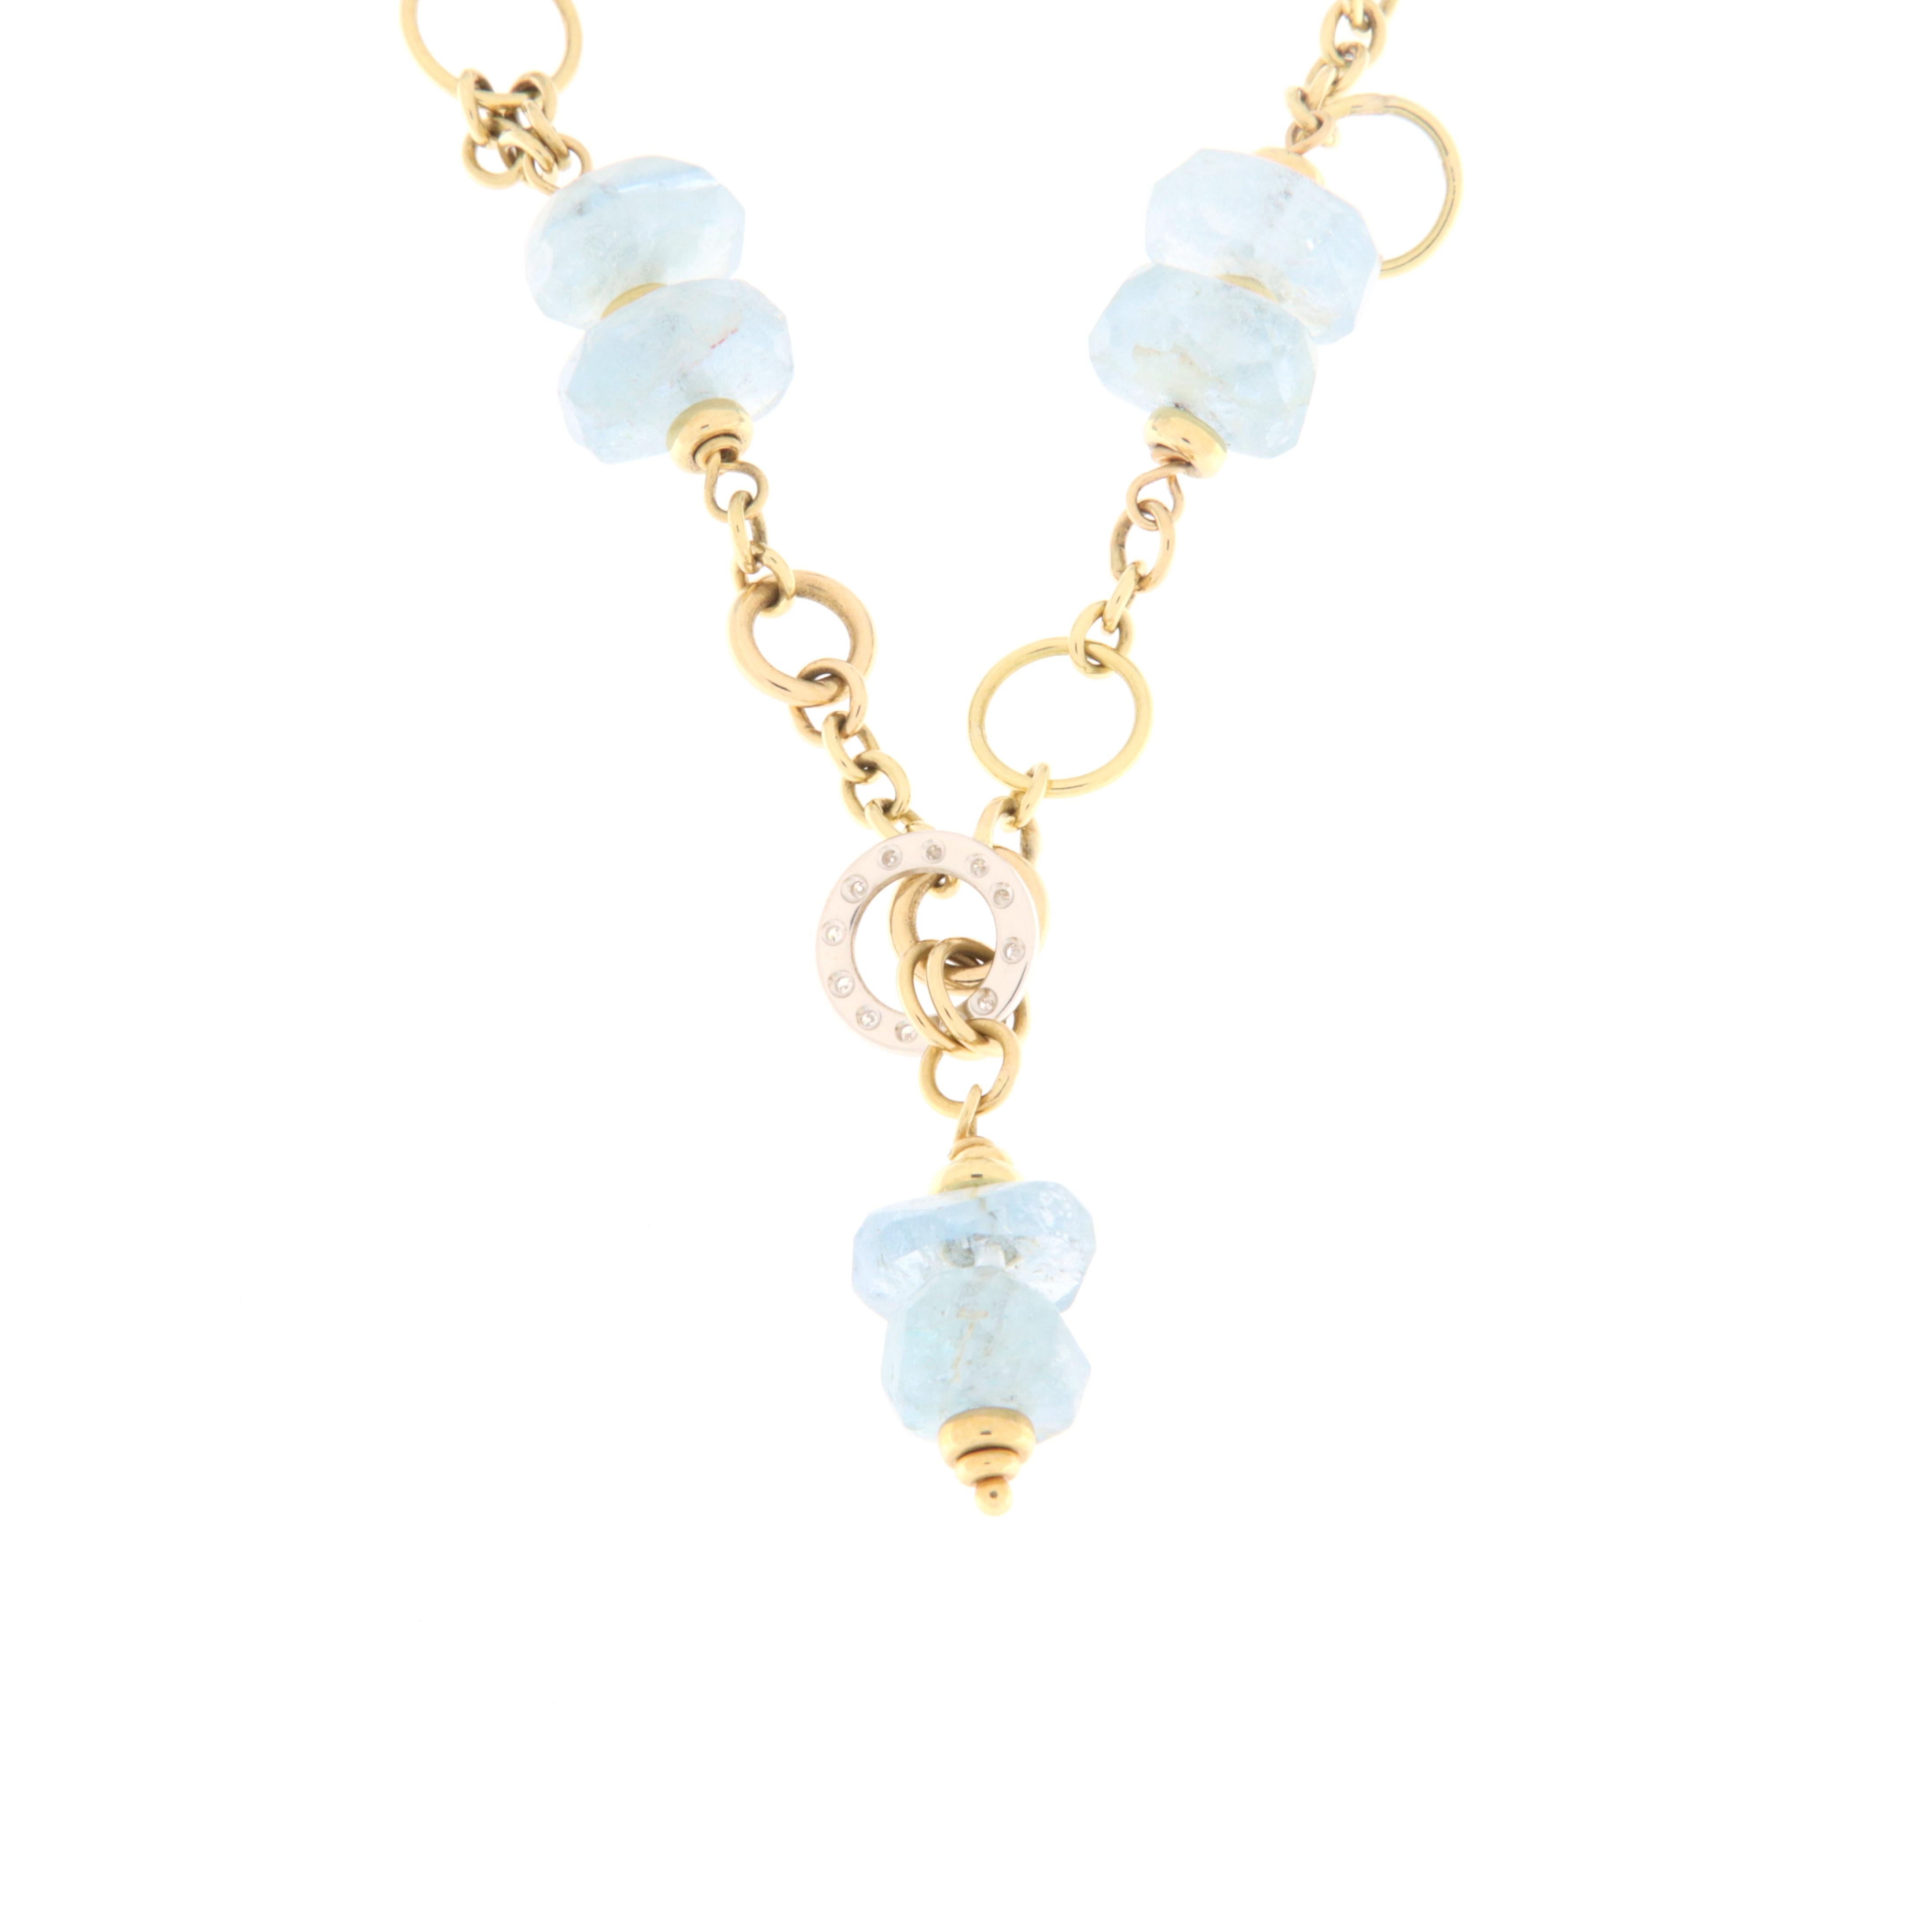 Yellow gold choker embellished with faceted aquamarine rondels and small diamonds. The central part of the necklace is formed by a double of aquamarine stones and a gold circle with diamonds. The length of the necklace is 50 cm. with the addition of